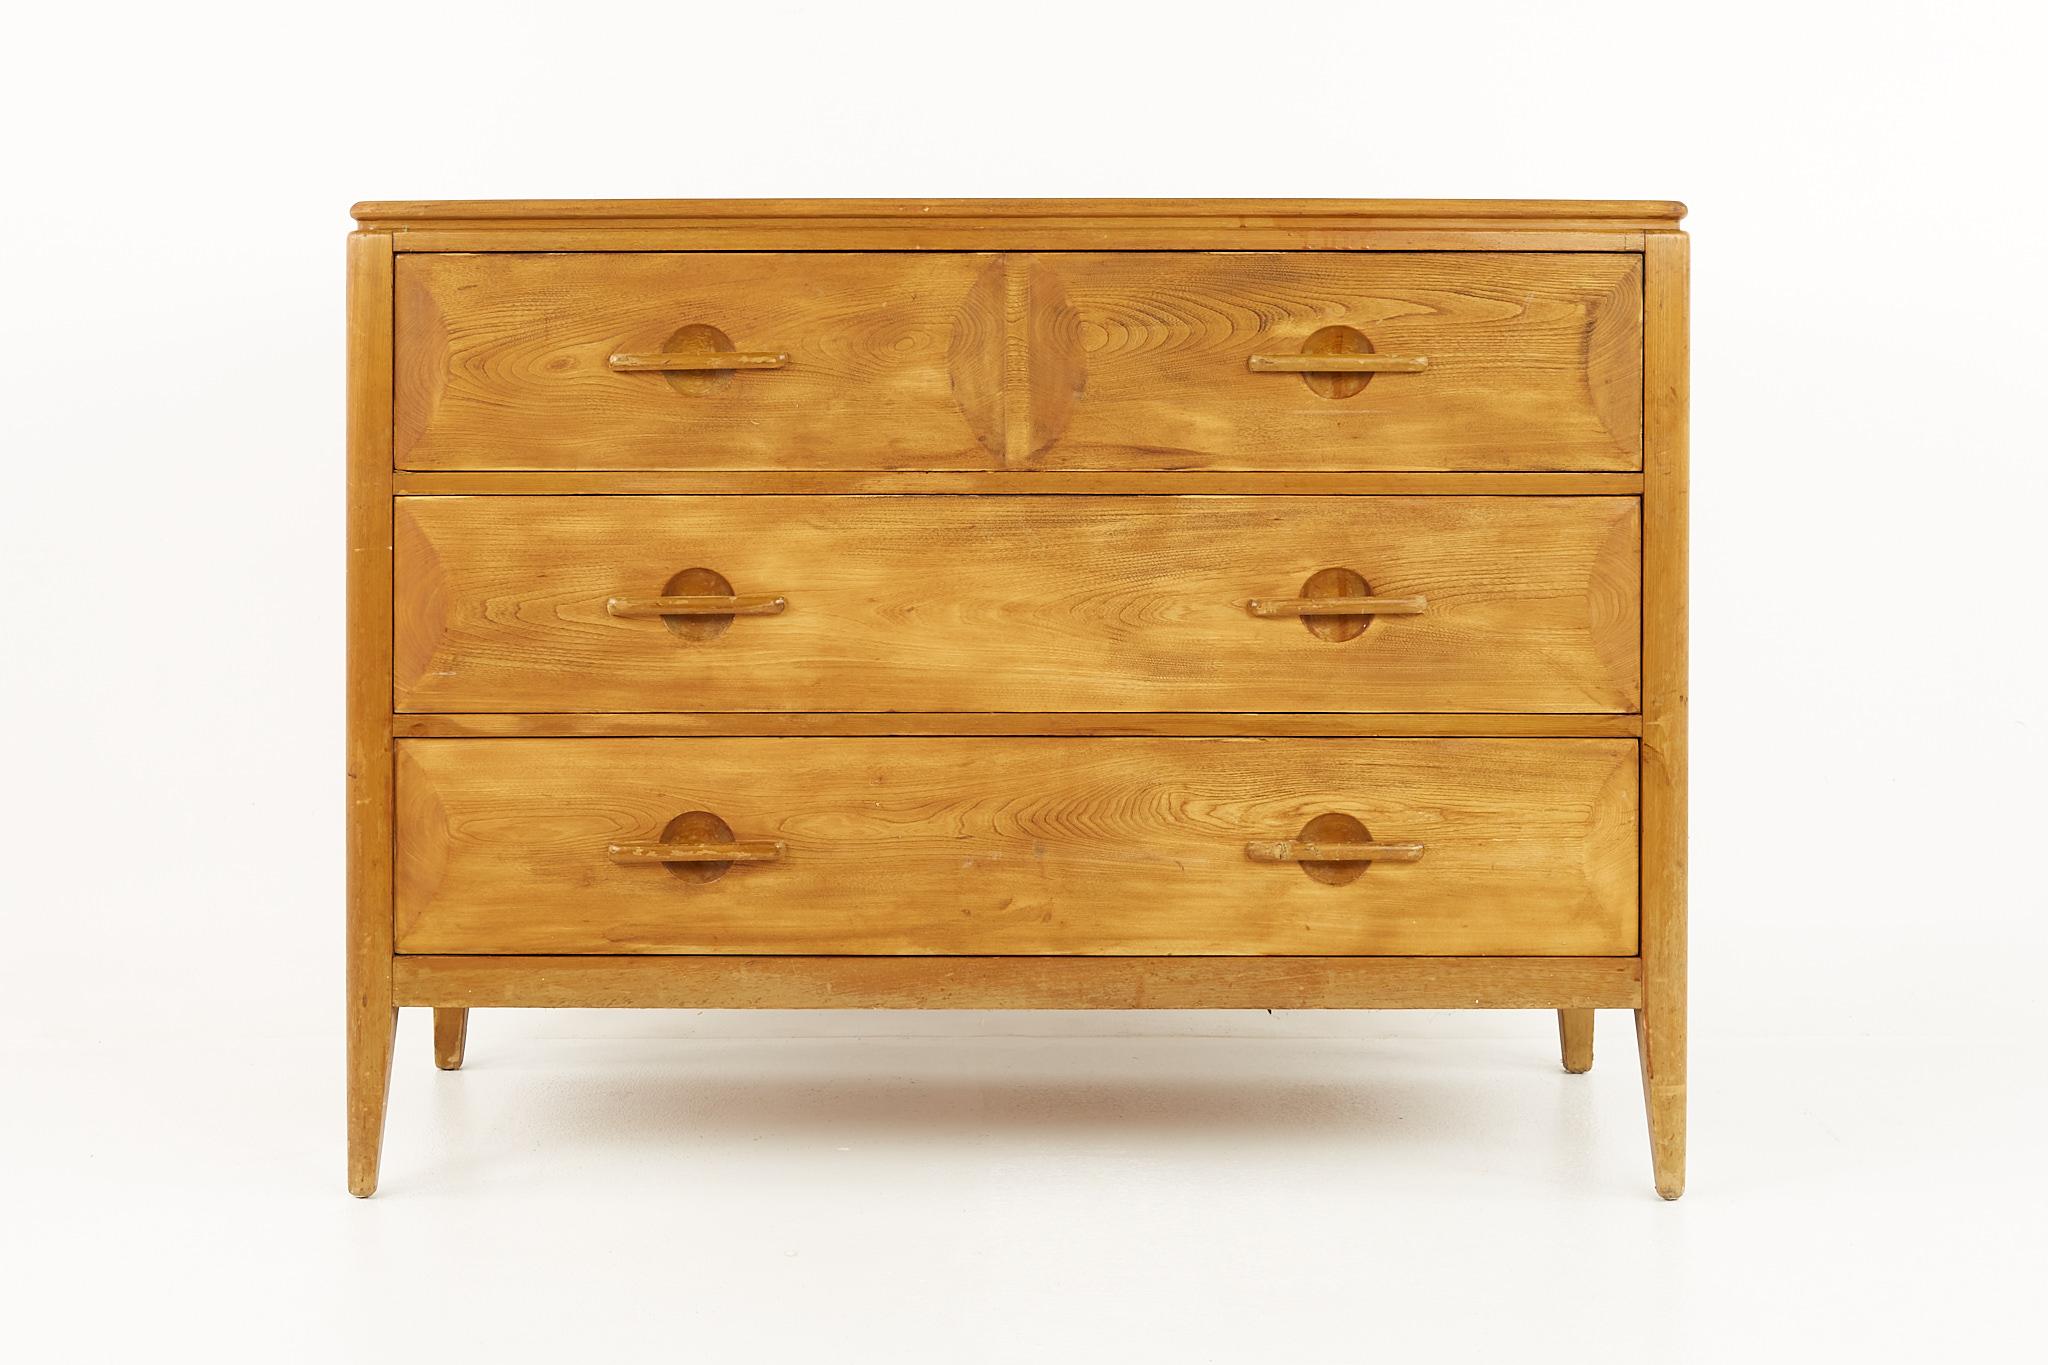 John Widdicomb mid century 4 drawer lowboy dresser

This dresser measures: 46 wide x 21.5 deep x 34 inches high

All pieces of furniture can be had in what we call restored vintage condition. That means the piece is restored upon purchase so